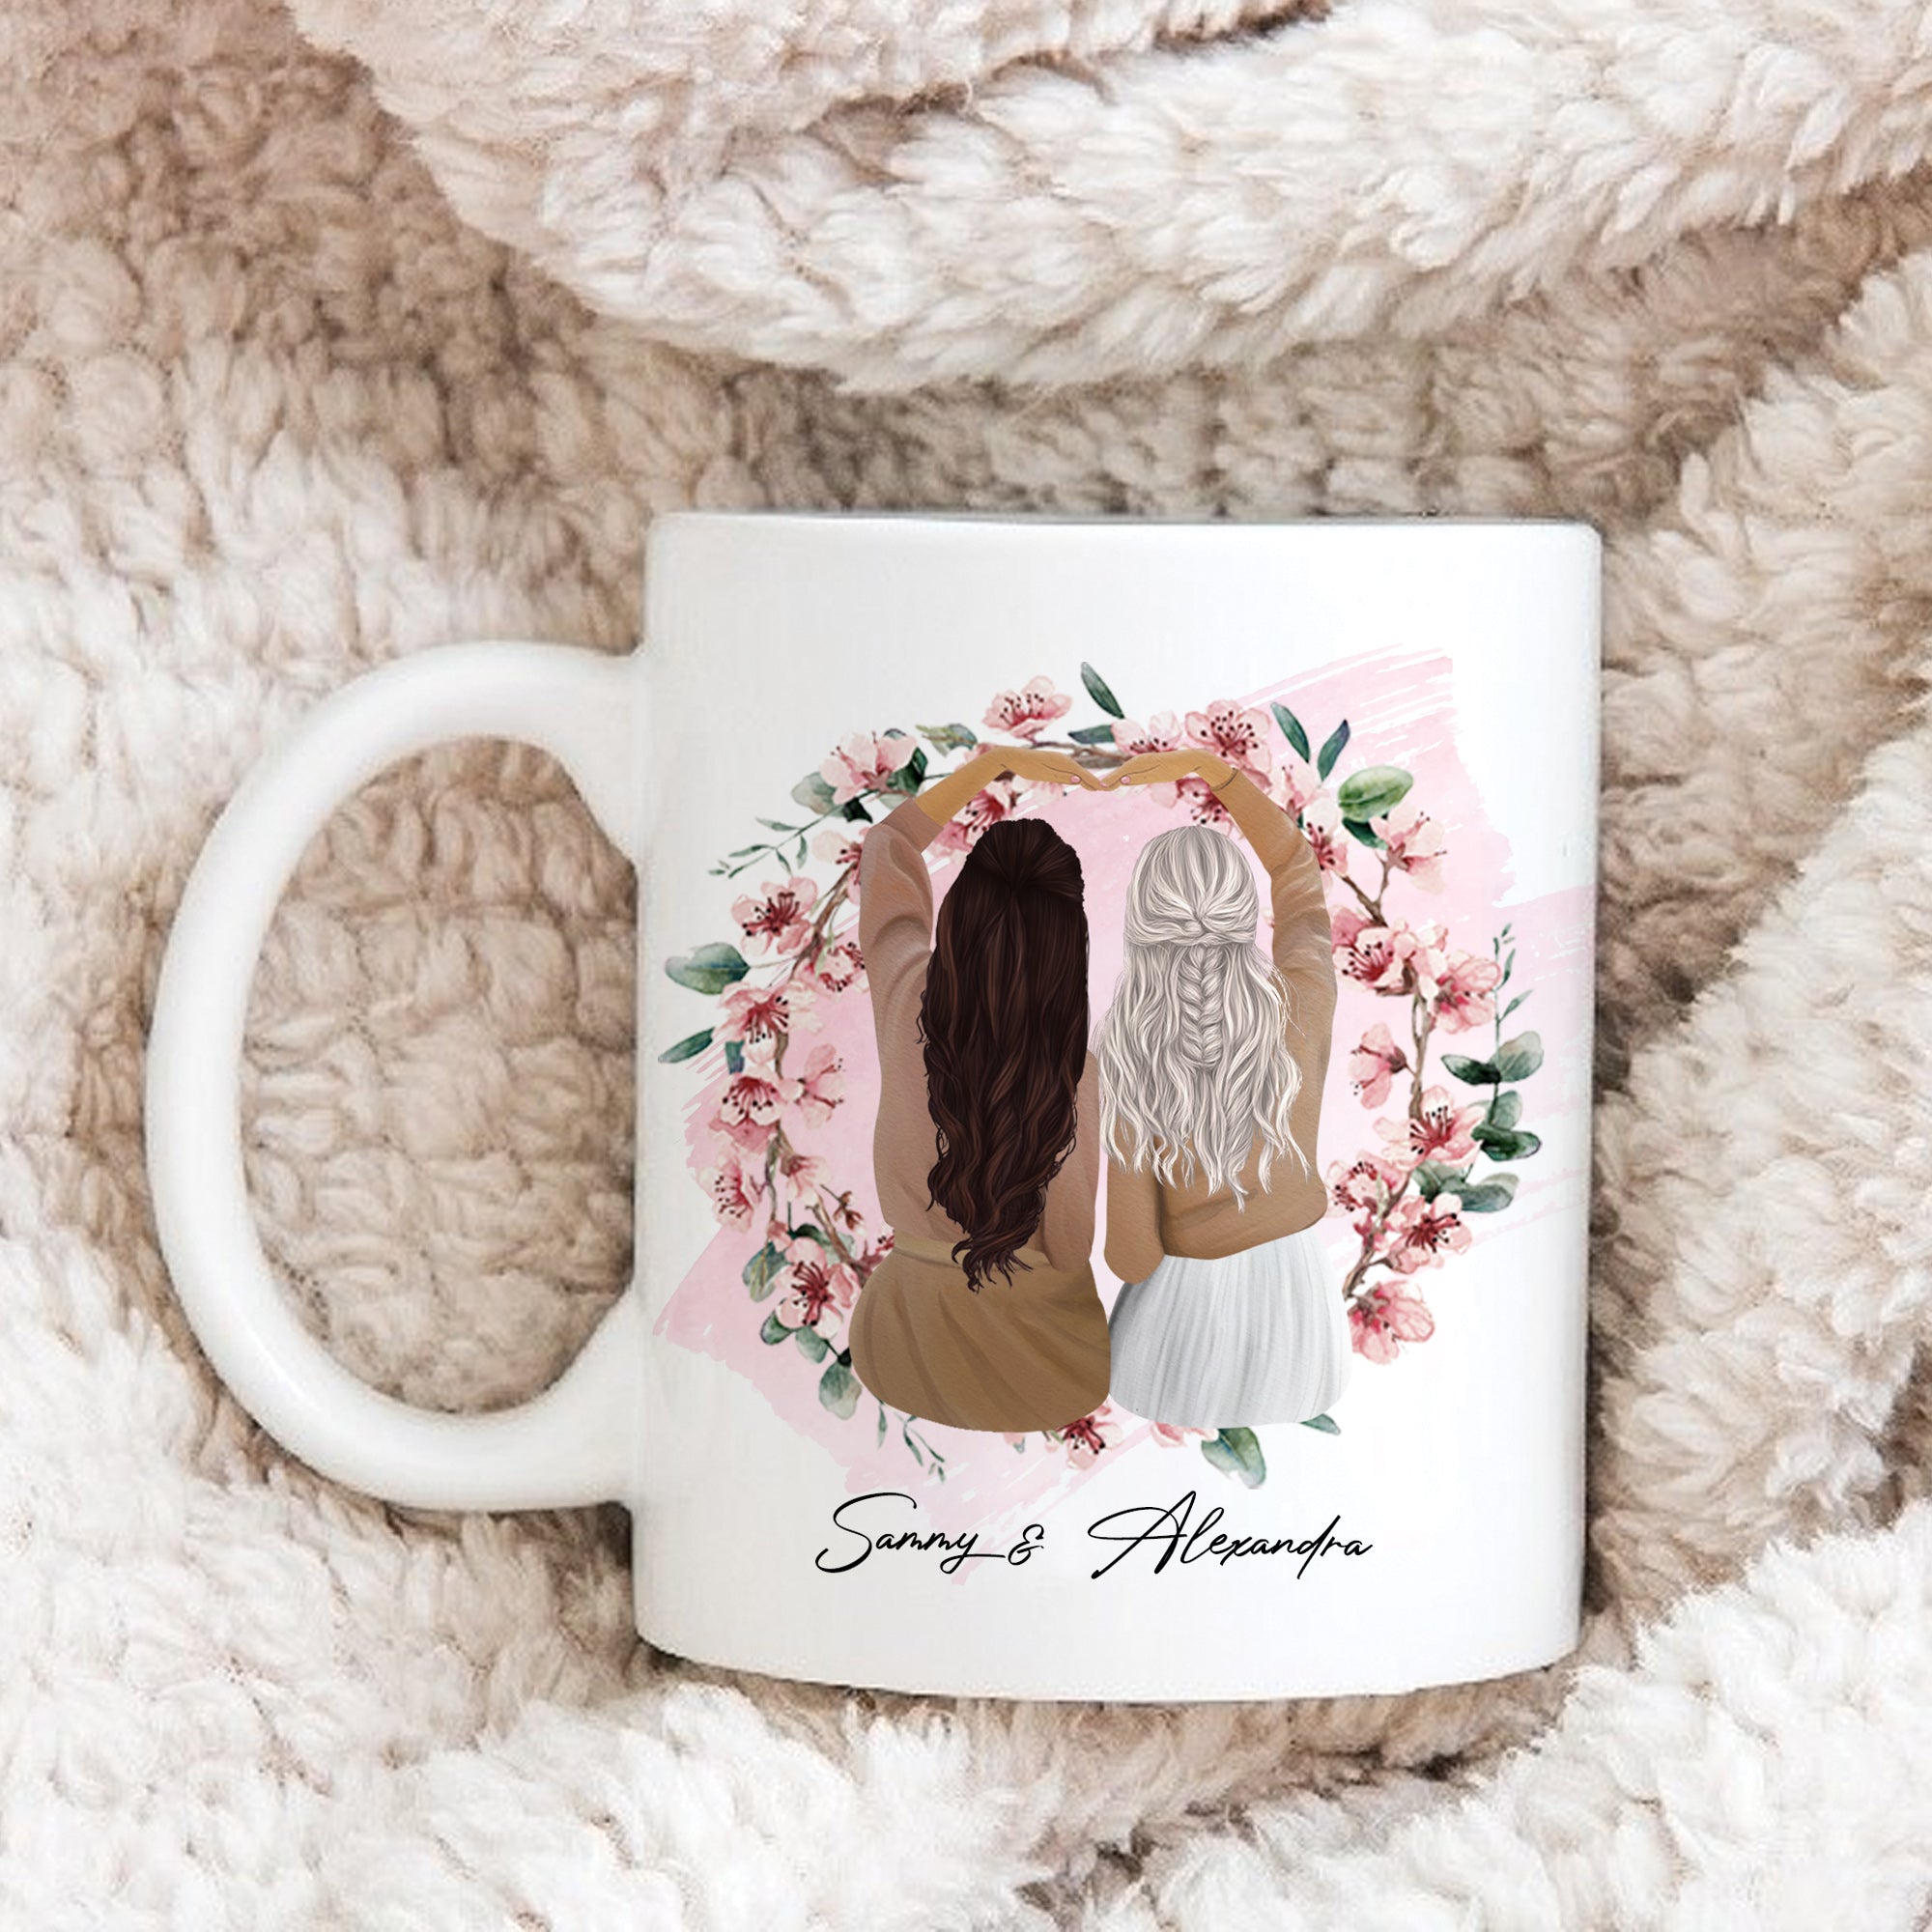 Personalized To My Besties Mug, The One Who Needs You Till The End, Gift For Best Friends